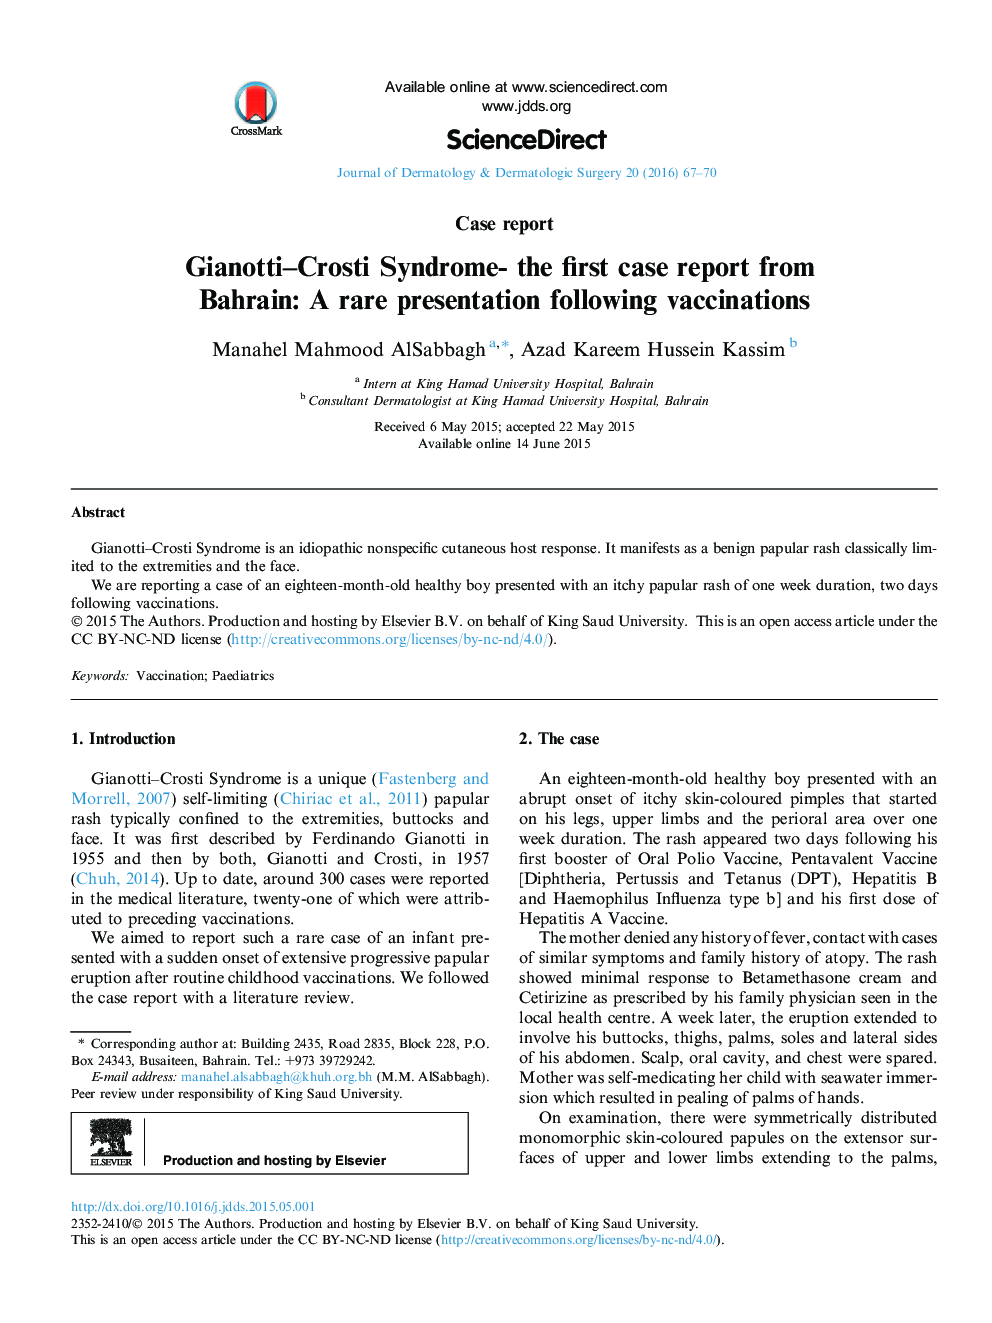 Gianotti–Crosti Syndrome- the first case report from Bahrain: A rare presentation following vaccinations 